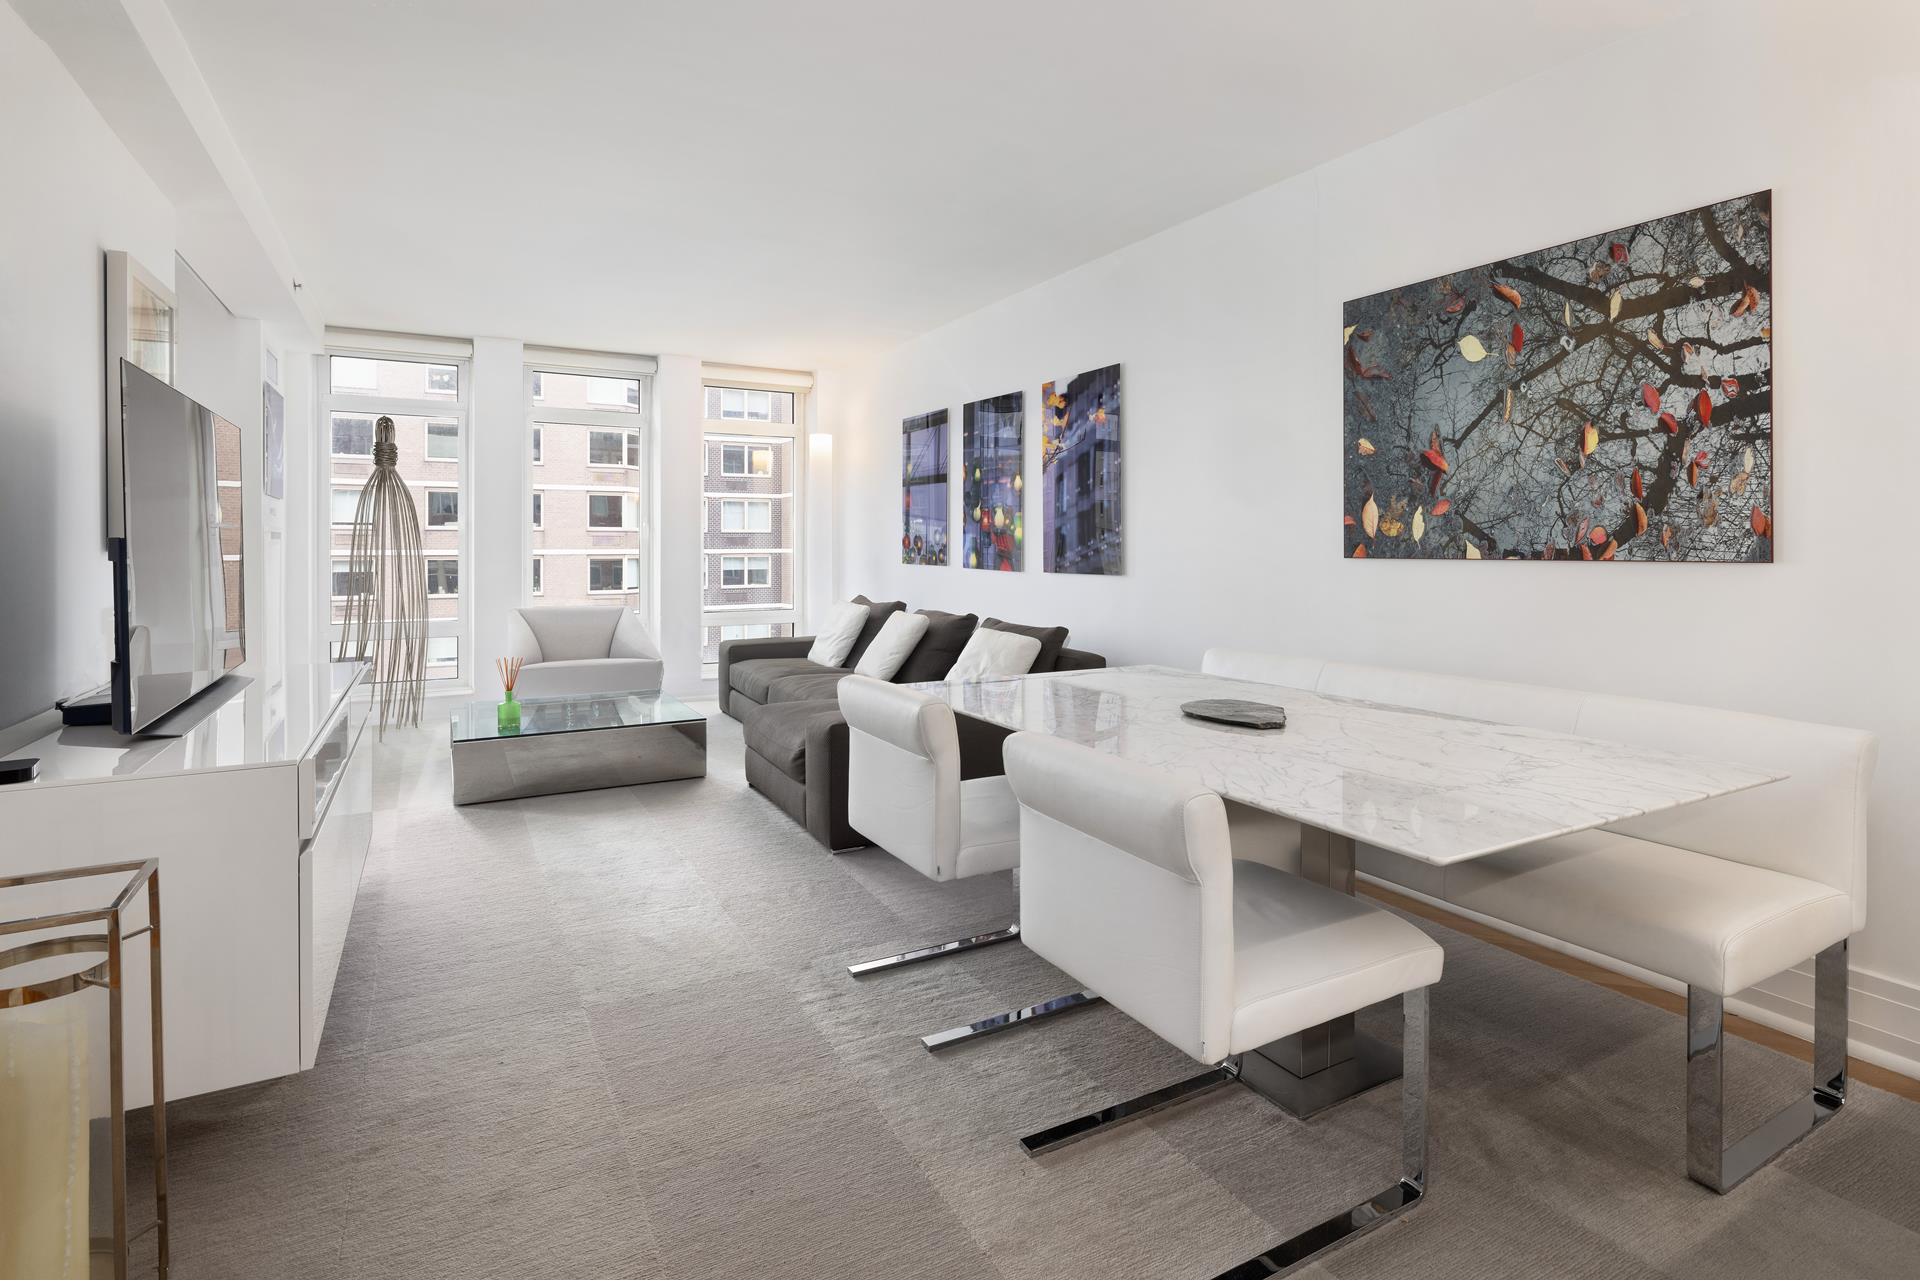 205 East 85th Street 14G, Yorkville, Upper East Side, NYC - 2 Bedrooms  
2.5 Bathrooms  
4 Rooms - 